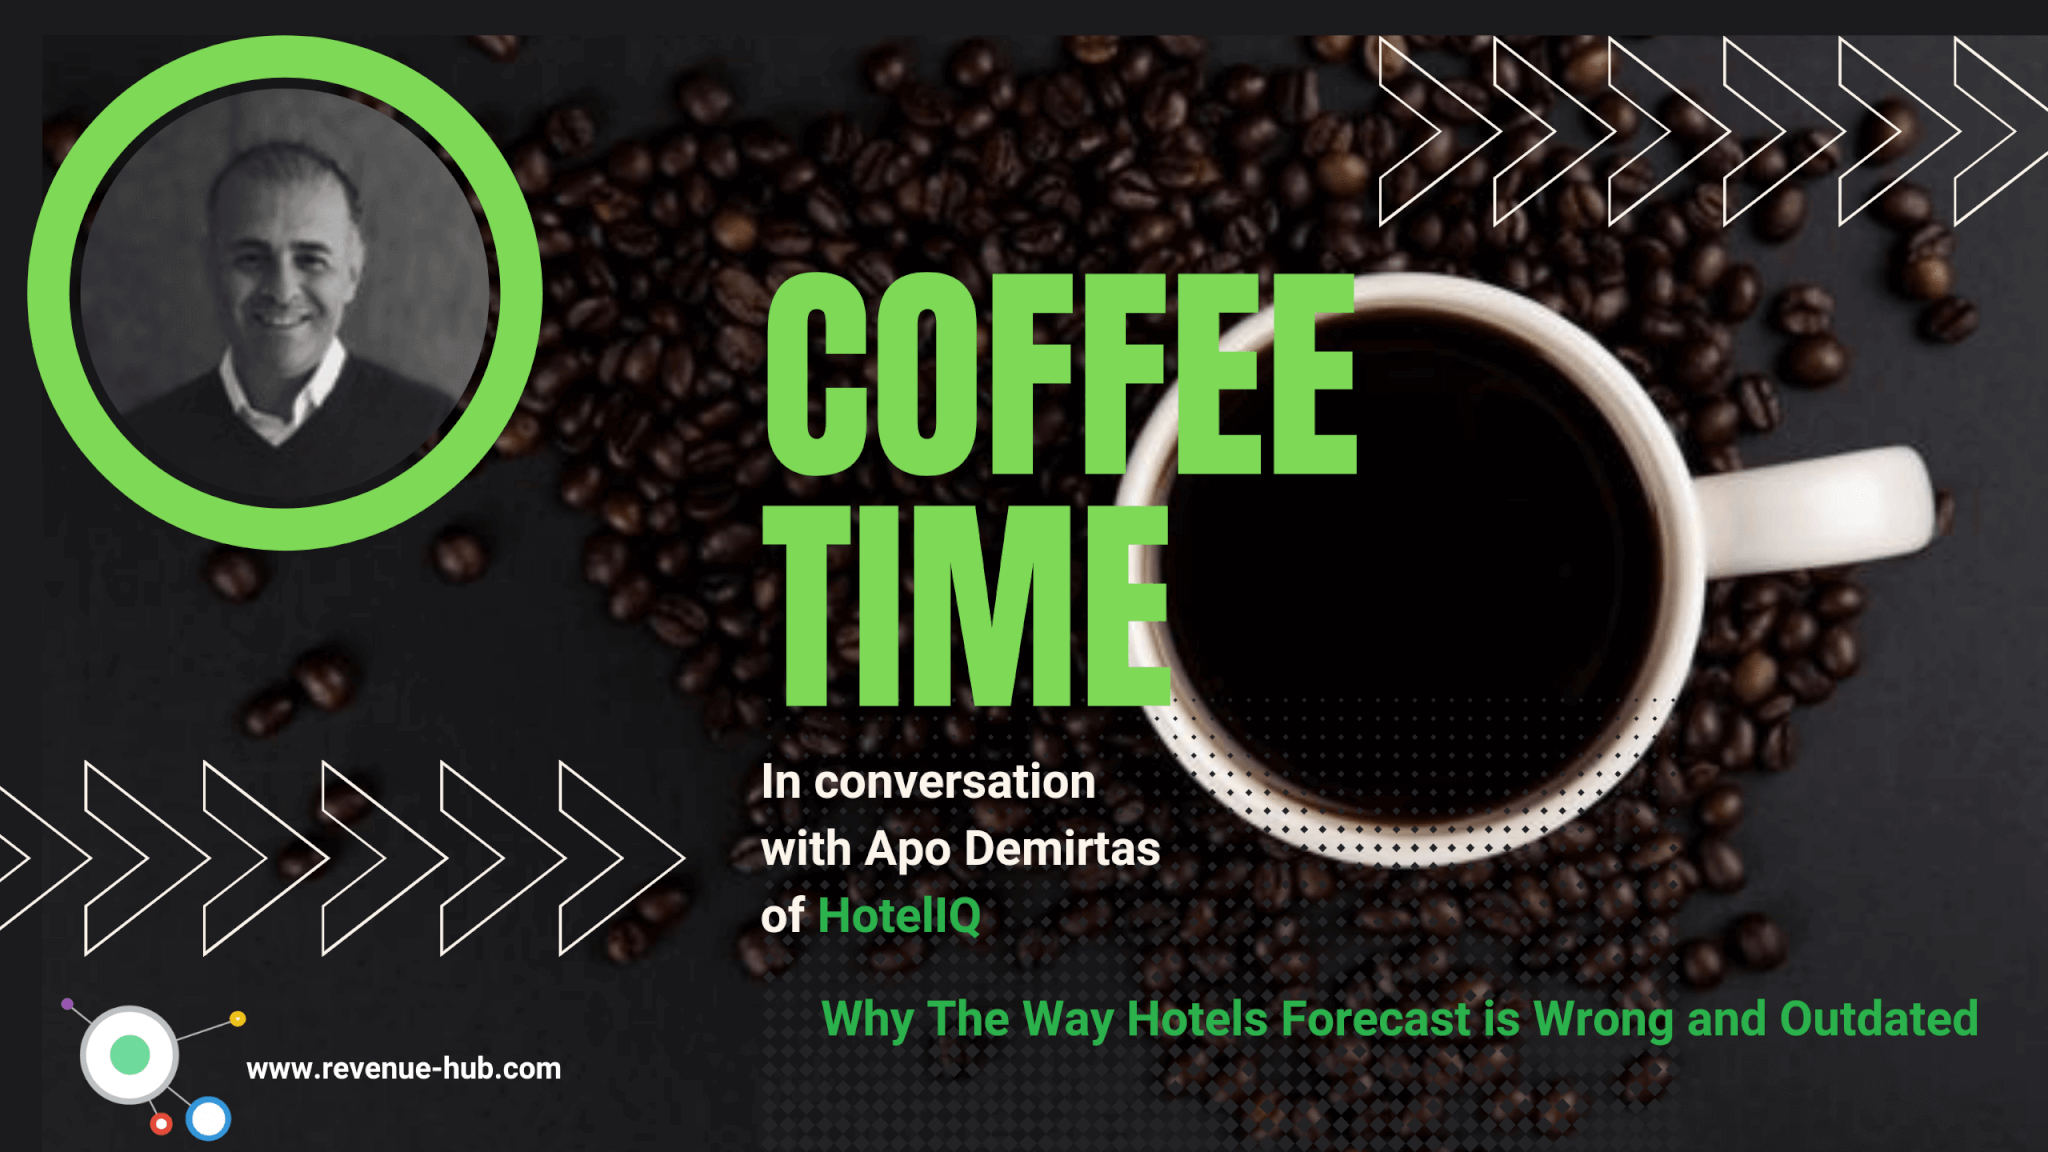 thumbnail image of coffee time discussion with apo demirtas of hoteliq about the way hotels forecast, why it is done wrong and is outdated